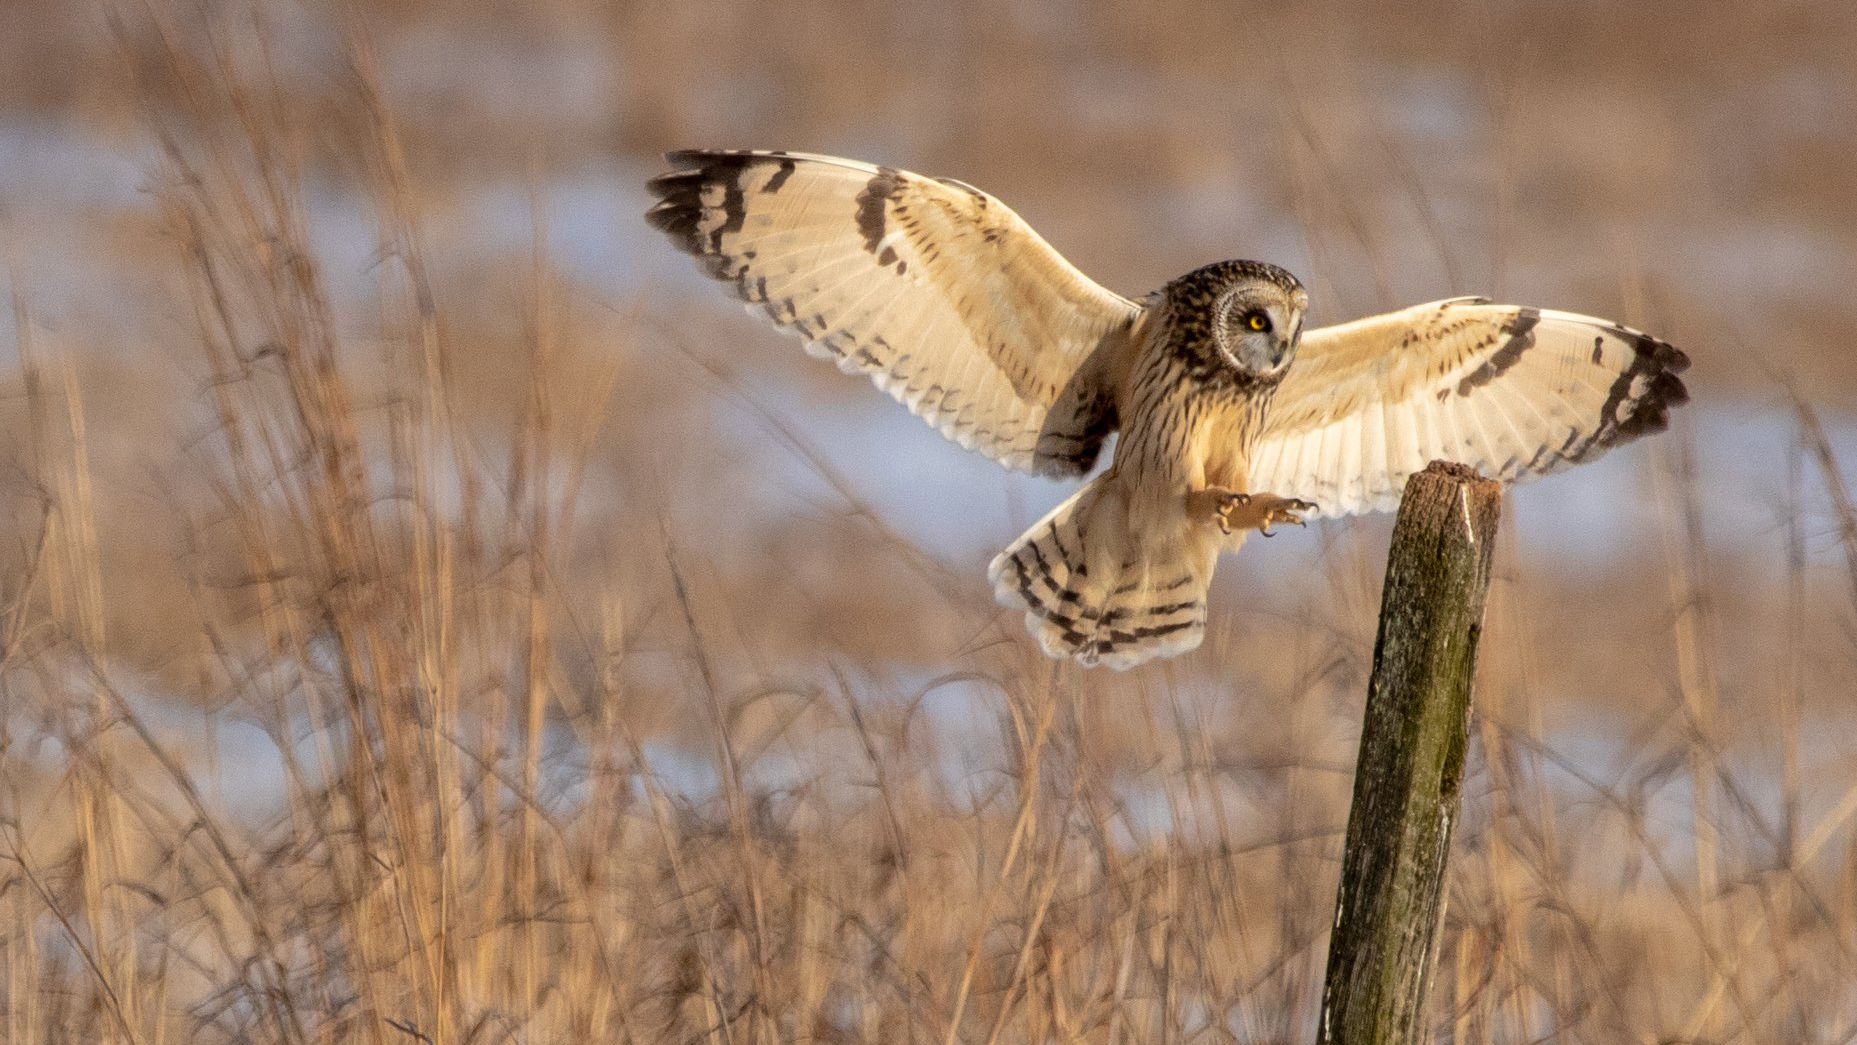 <strong>Galeville Army Airfield, New York -- </strong>Today, species like the short-eared owl (pictured) thrive at the 597-acre park, now known as Shawangunk Grasslands National Wildlife Refuge. Hawks, harriers and the occasional coyote are among the animals that populate the grassland, according to the <a href="index.php?page=&url=https%3A%2F%2Fwww.fws.gov%2Frefuge%2Fshawangunk-grasslands%2Fspecies" target="_blank" target="_blank">US Fish and Wildlife Service</a>.